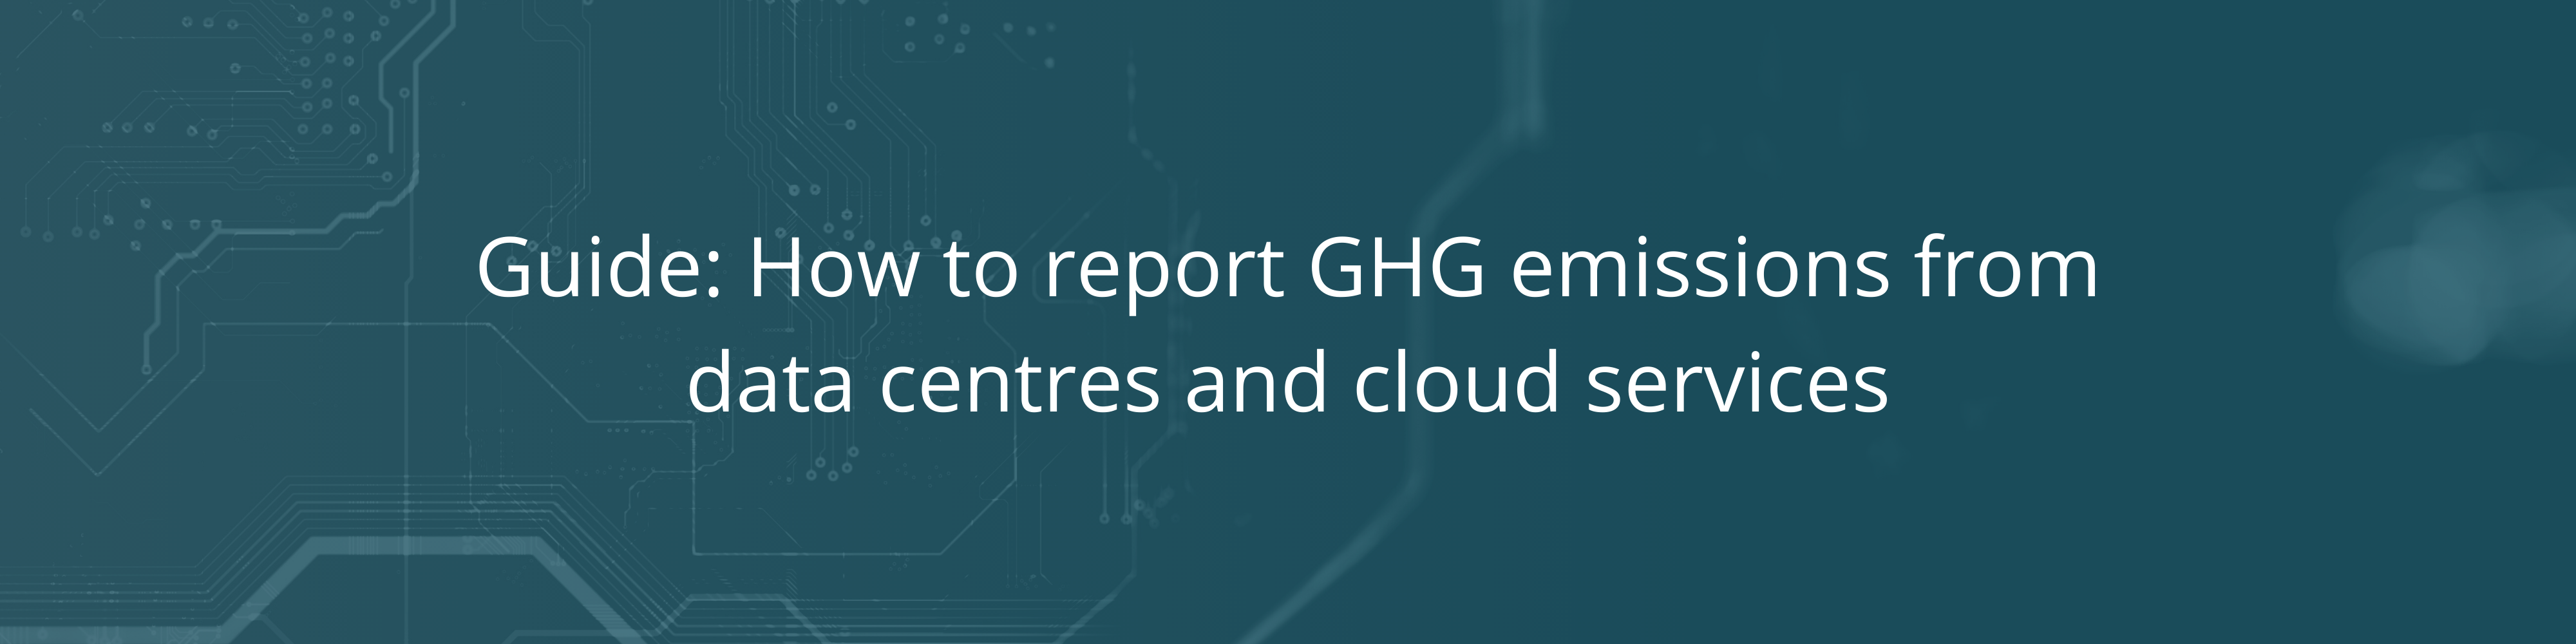 How to report GHG emissions from data centres and cloud services-header